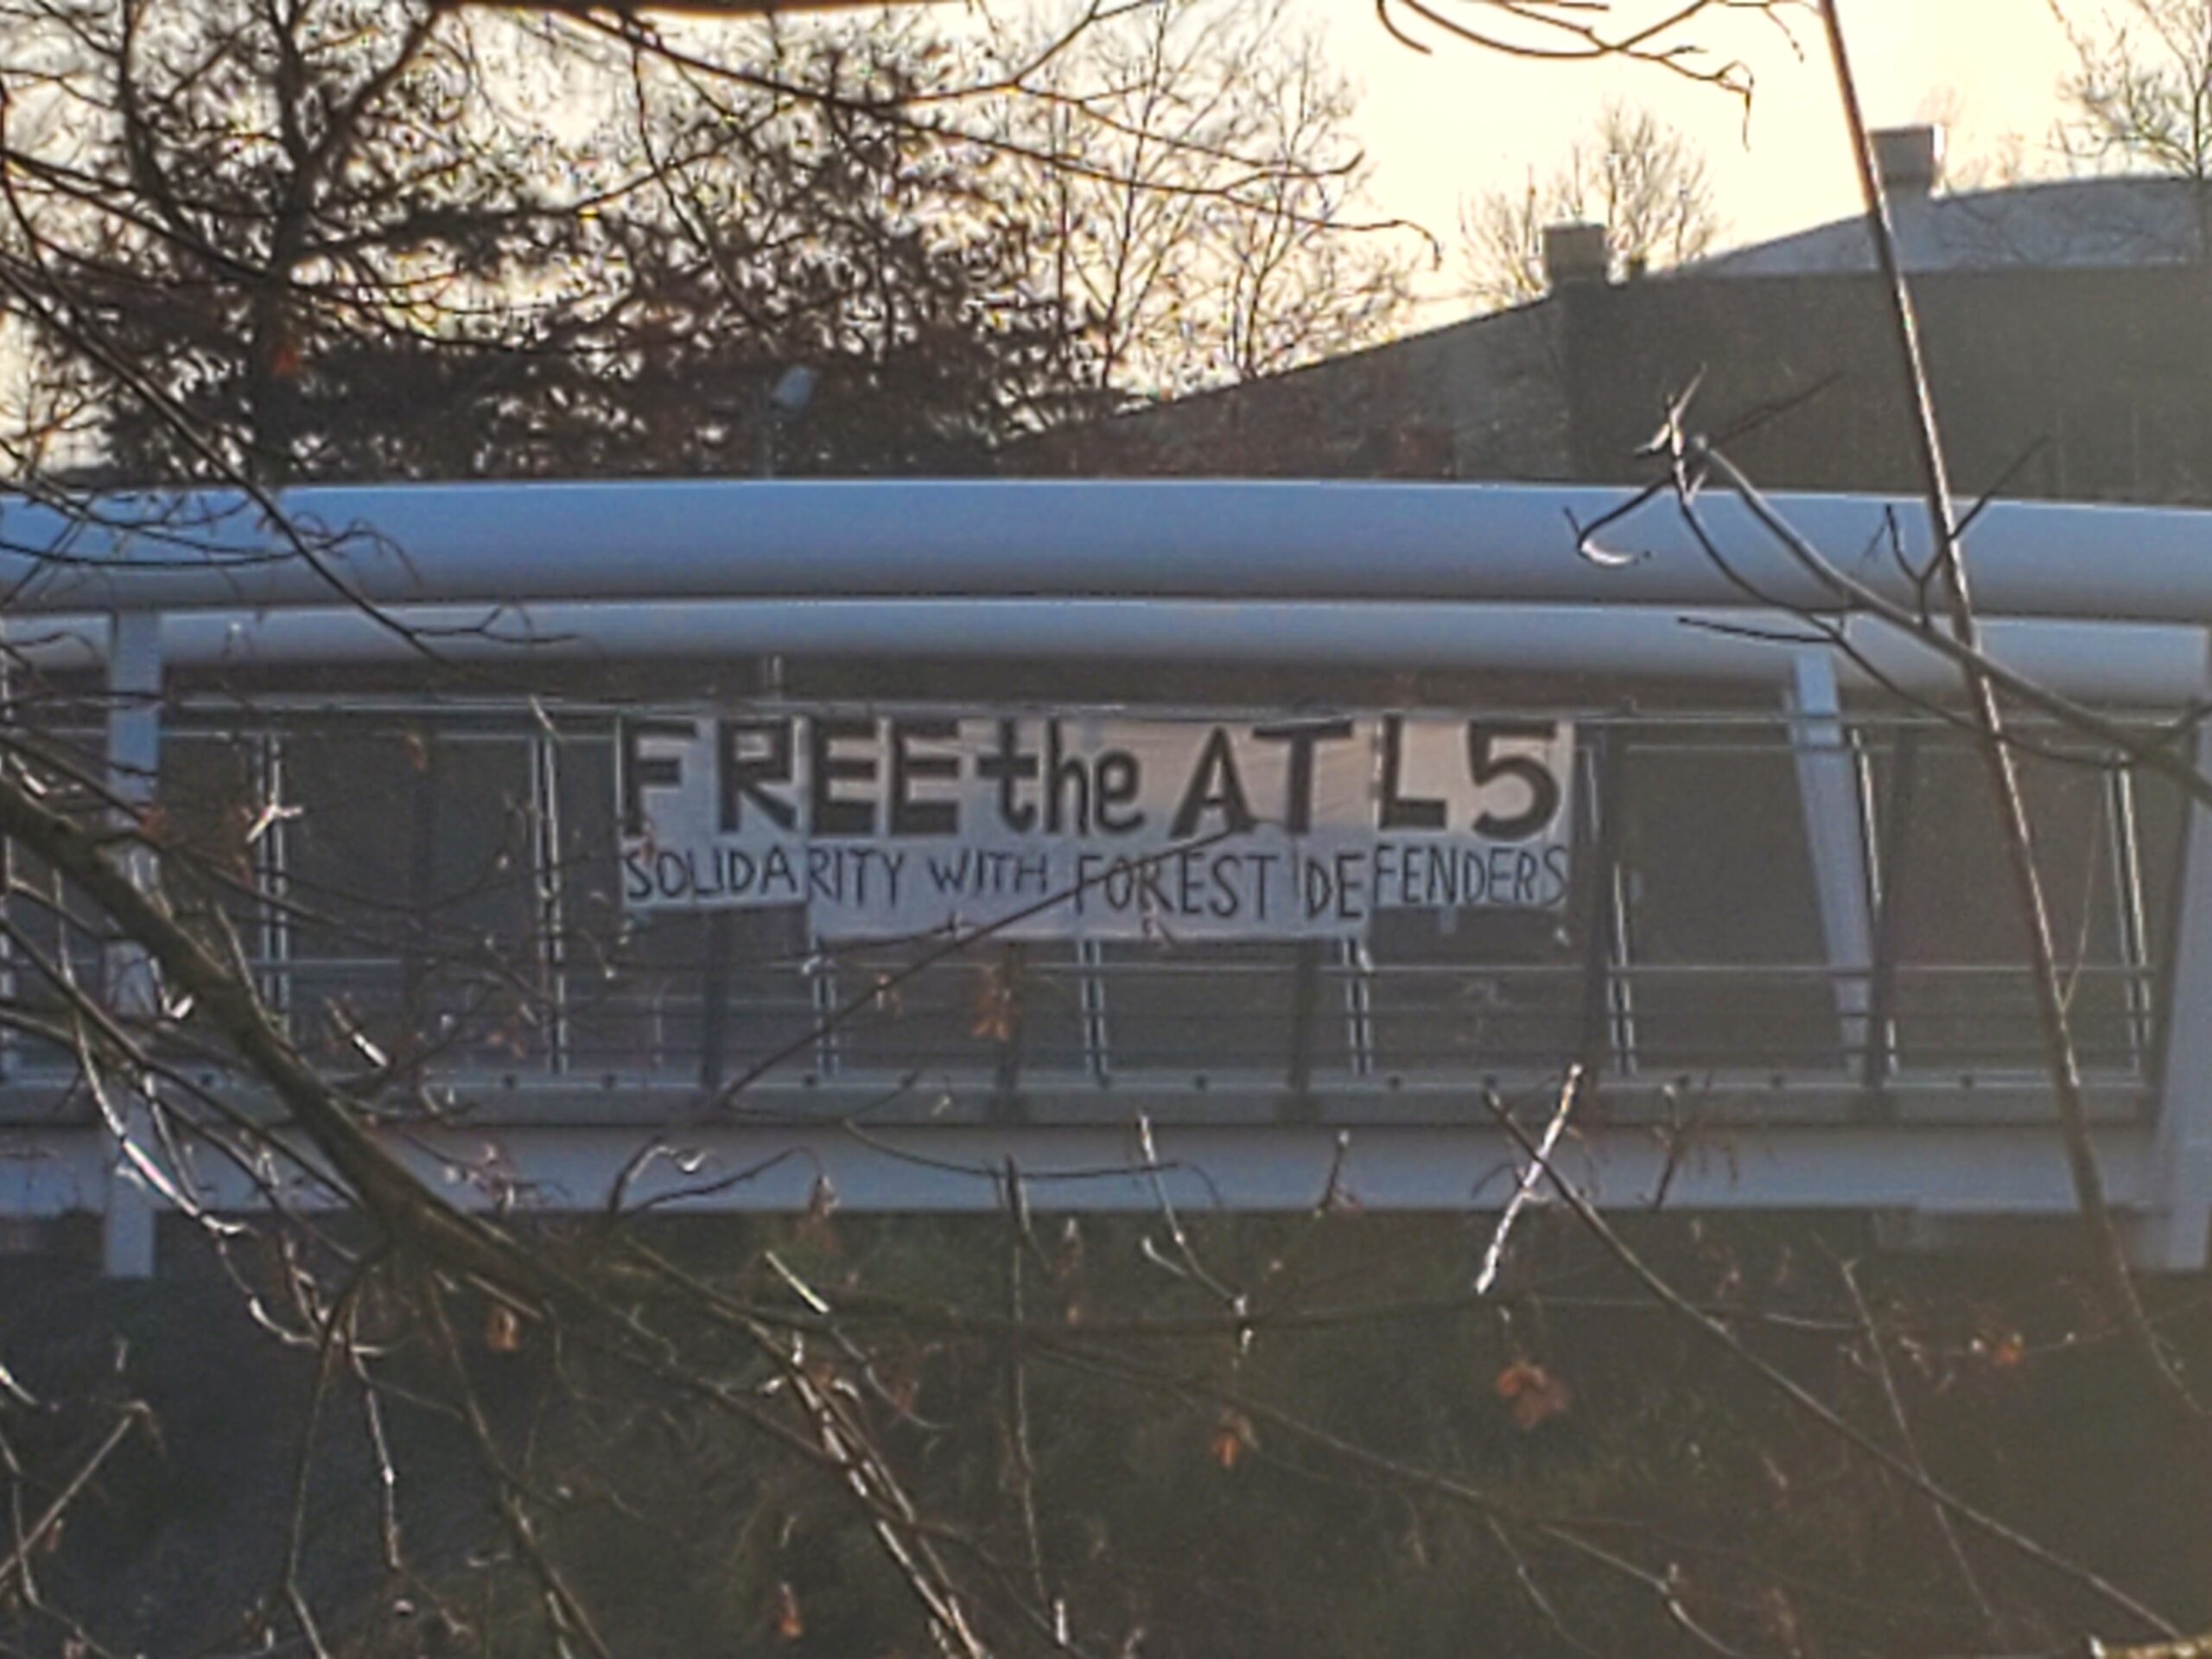 A close-up of a banner reading "FREE THE ATL 5 SOLIDARITY WITH FOREST DEFENDERS".